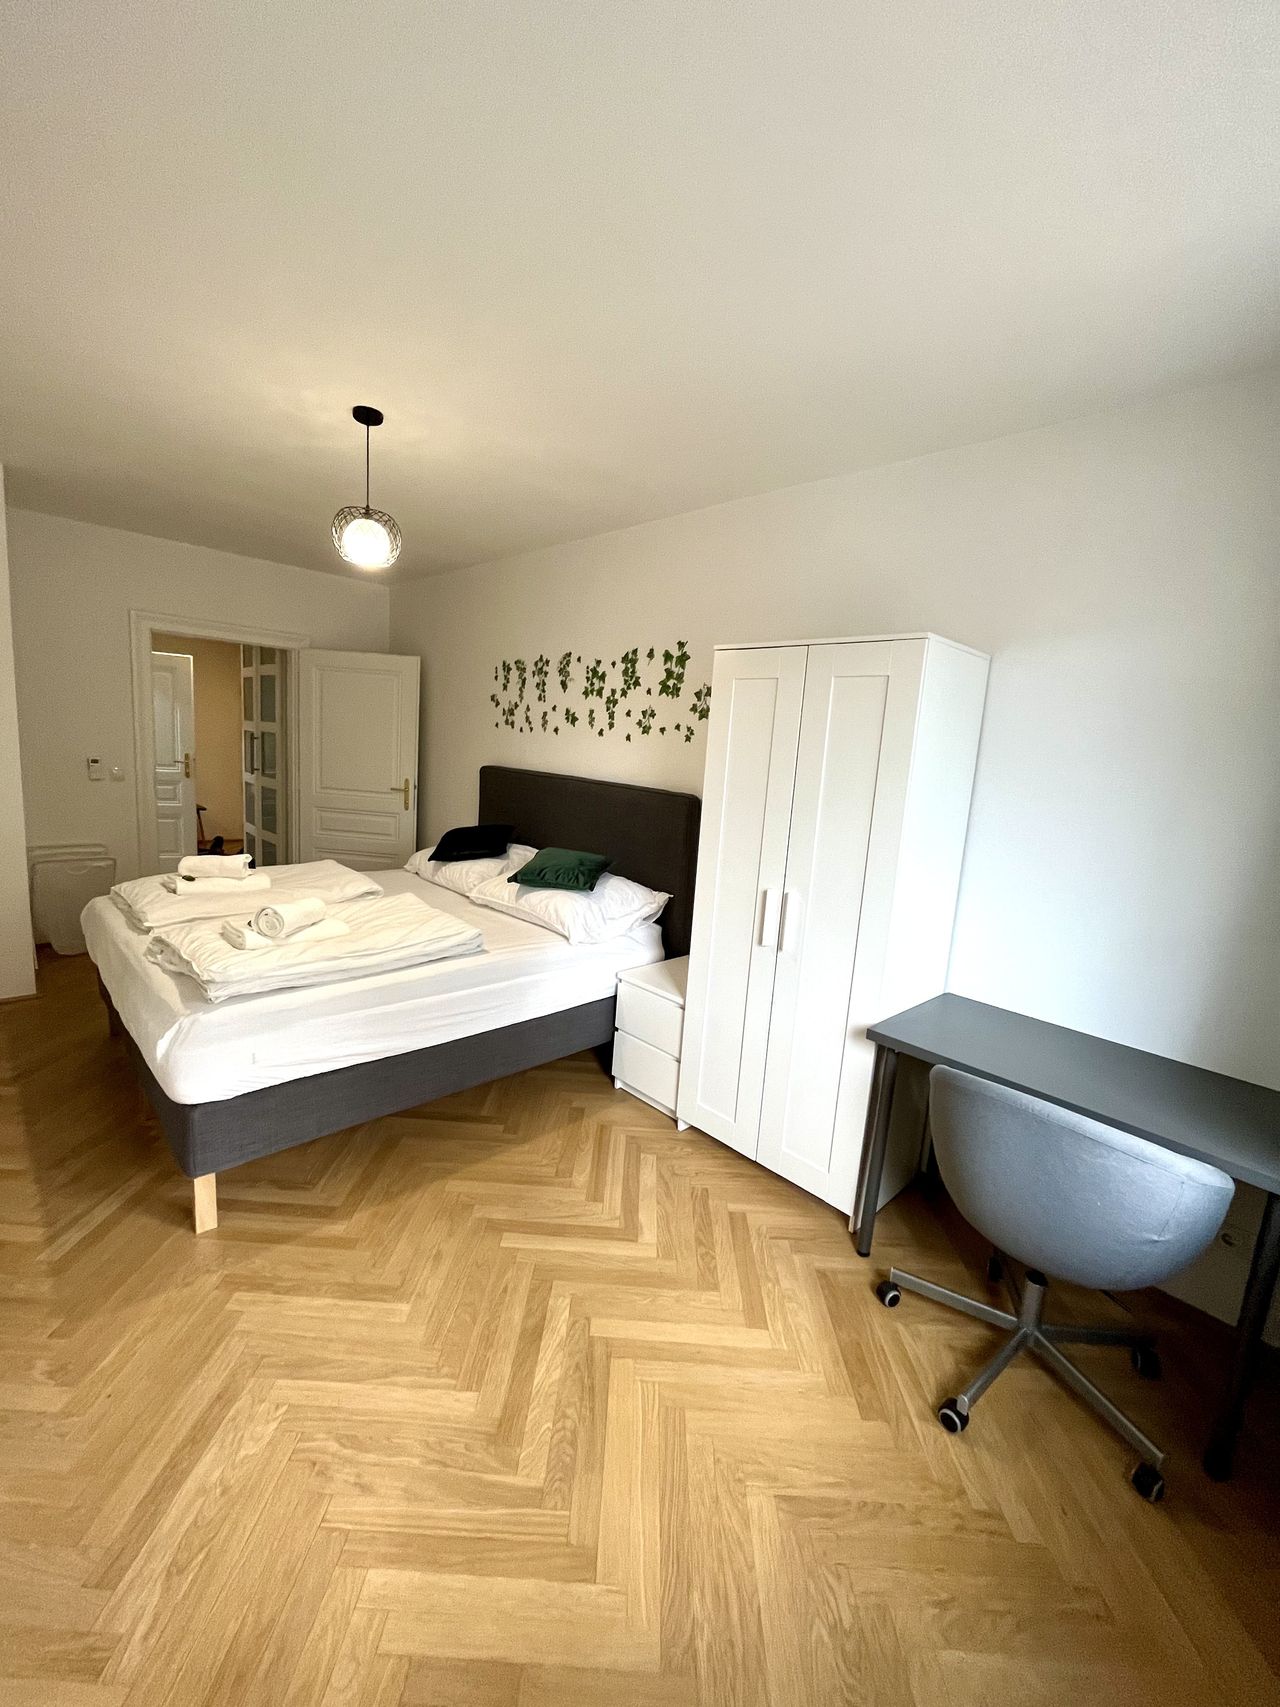 Refurbished dream flat with terrace, U1 Nestroyplatz, just a few steps from the city centre